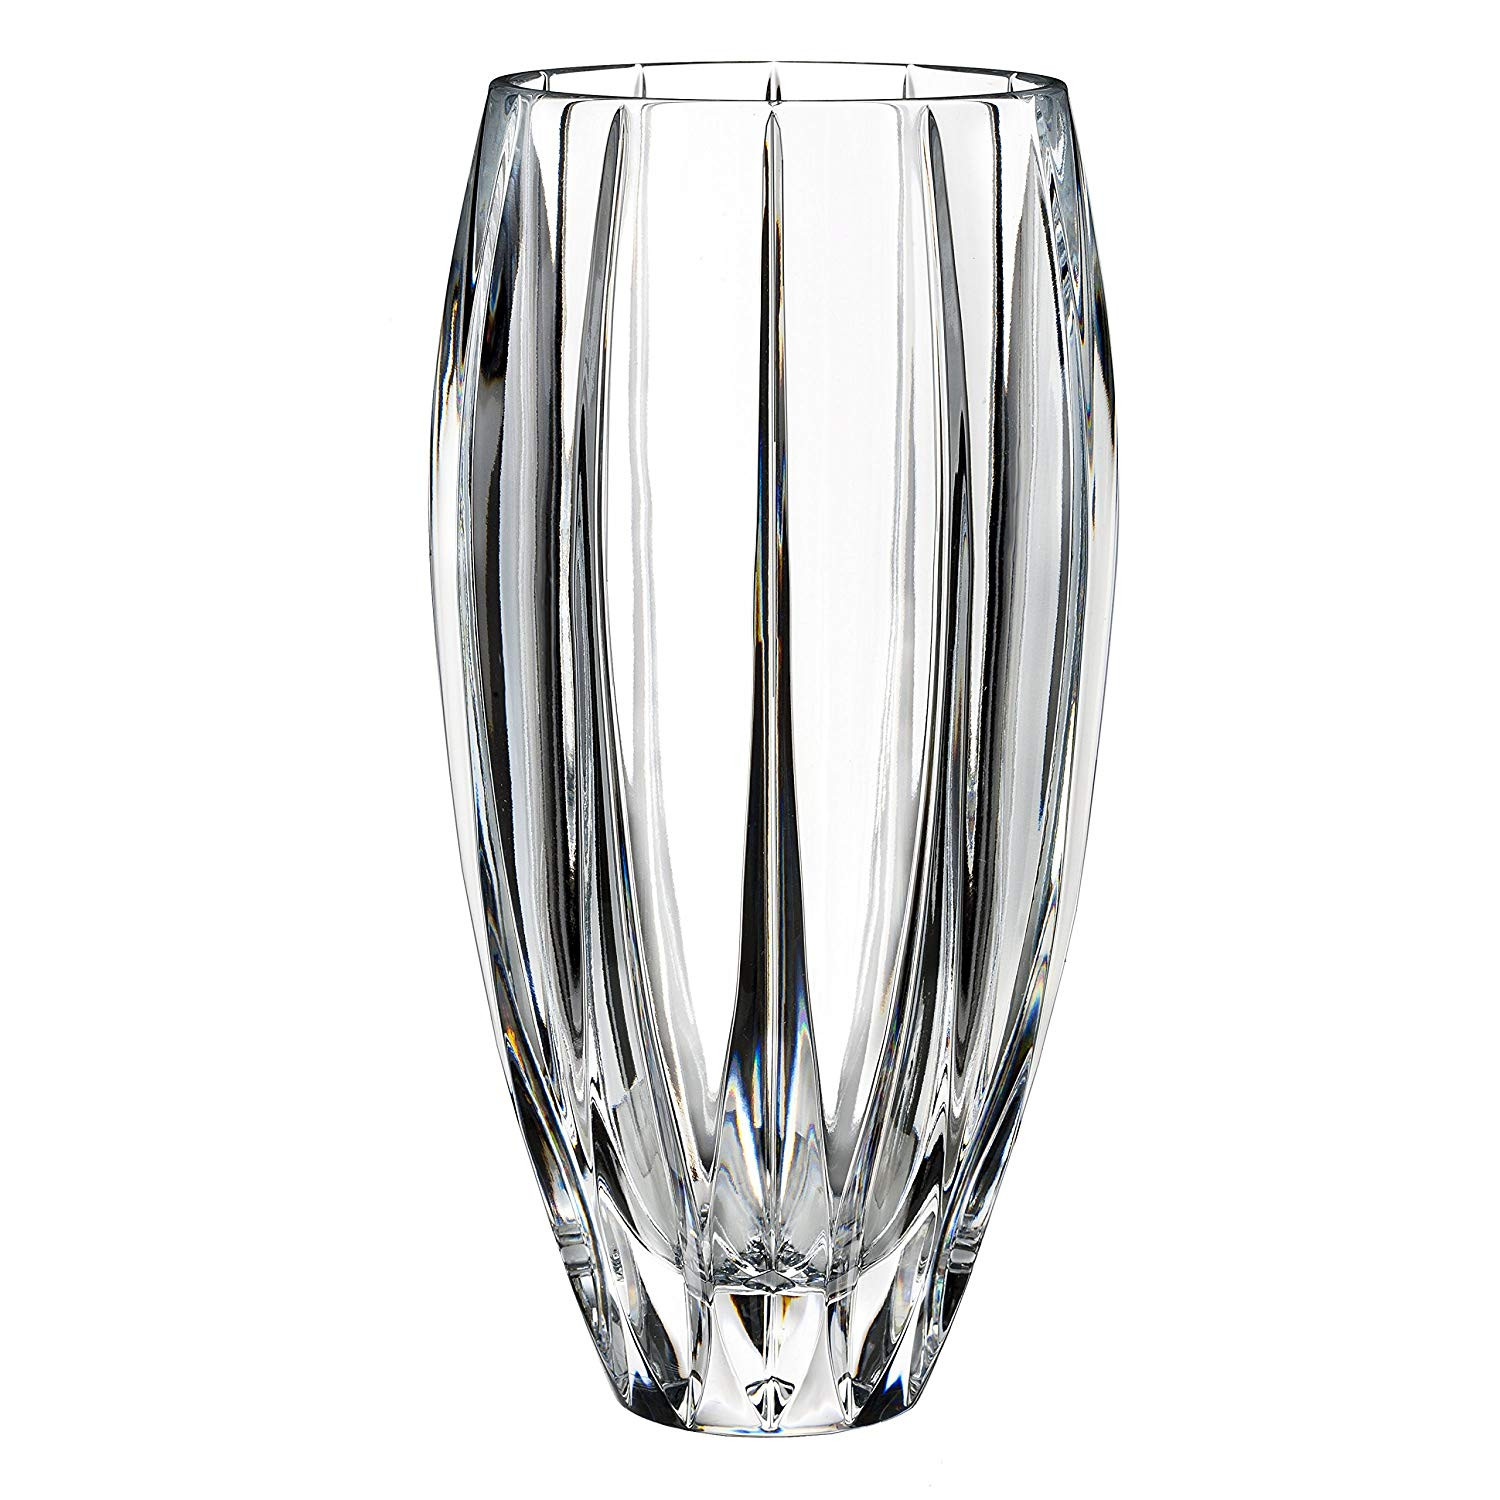 waterford 6 inch vase of amazon com marquis by waterford phoenix vase 11 home kitchen inside 91g1jn9dval sl1500